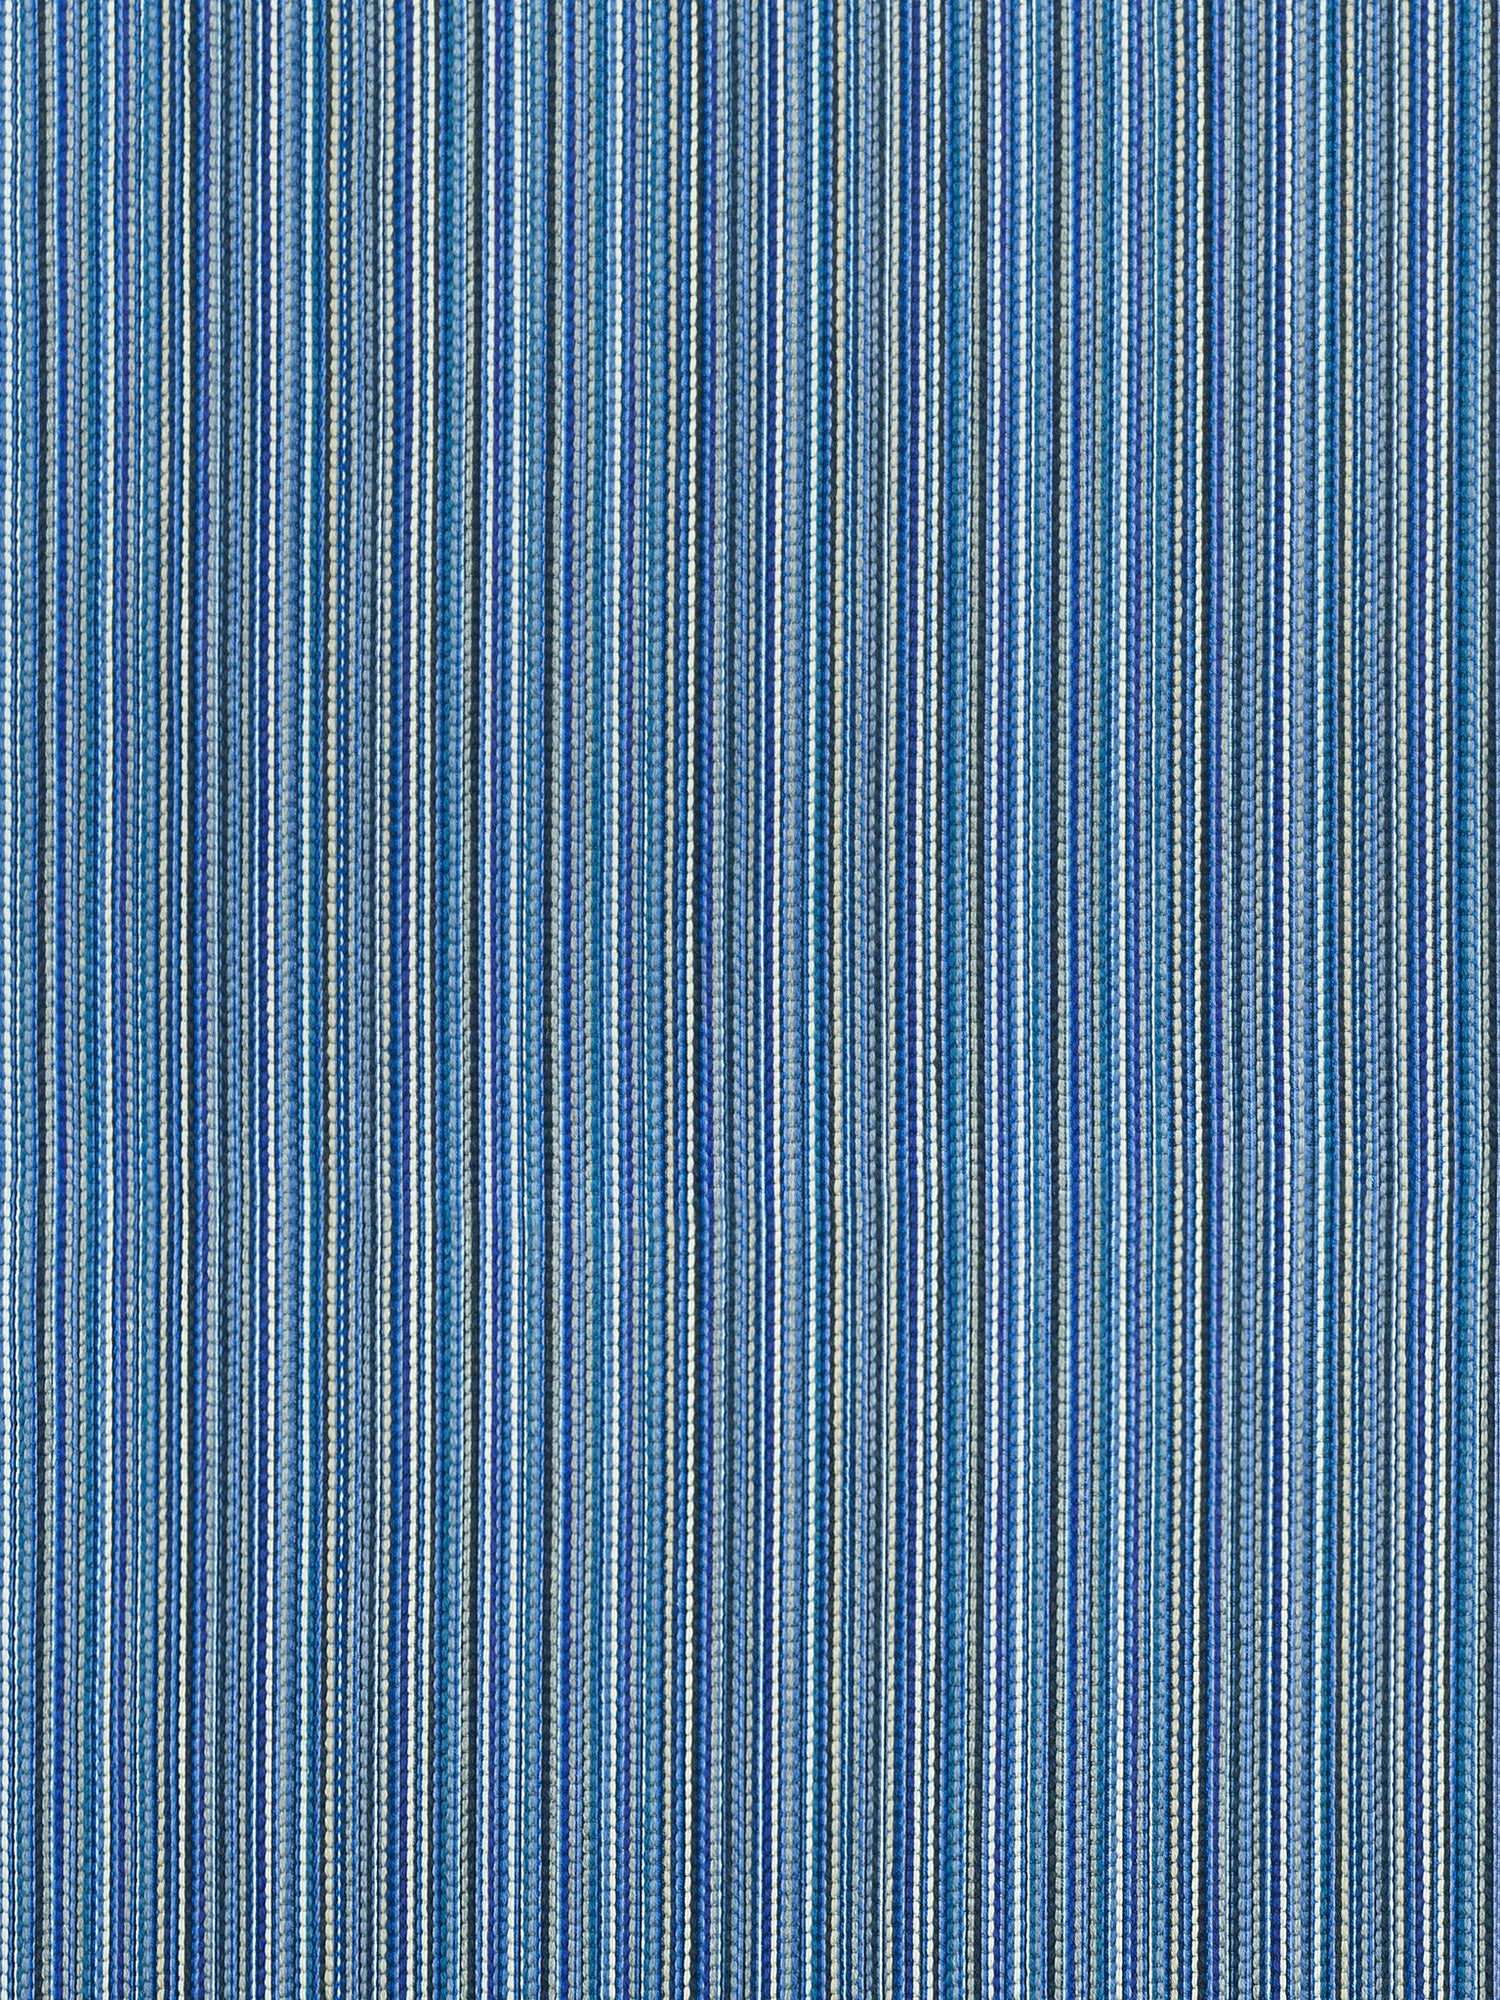 Alder Stripe fabric in bluejay color - pattern number GW 000427231 - by Scalamandre in the Grey Watkins collection